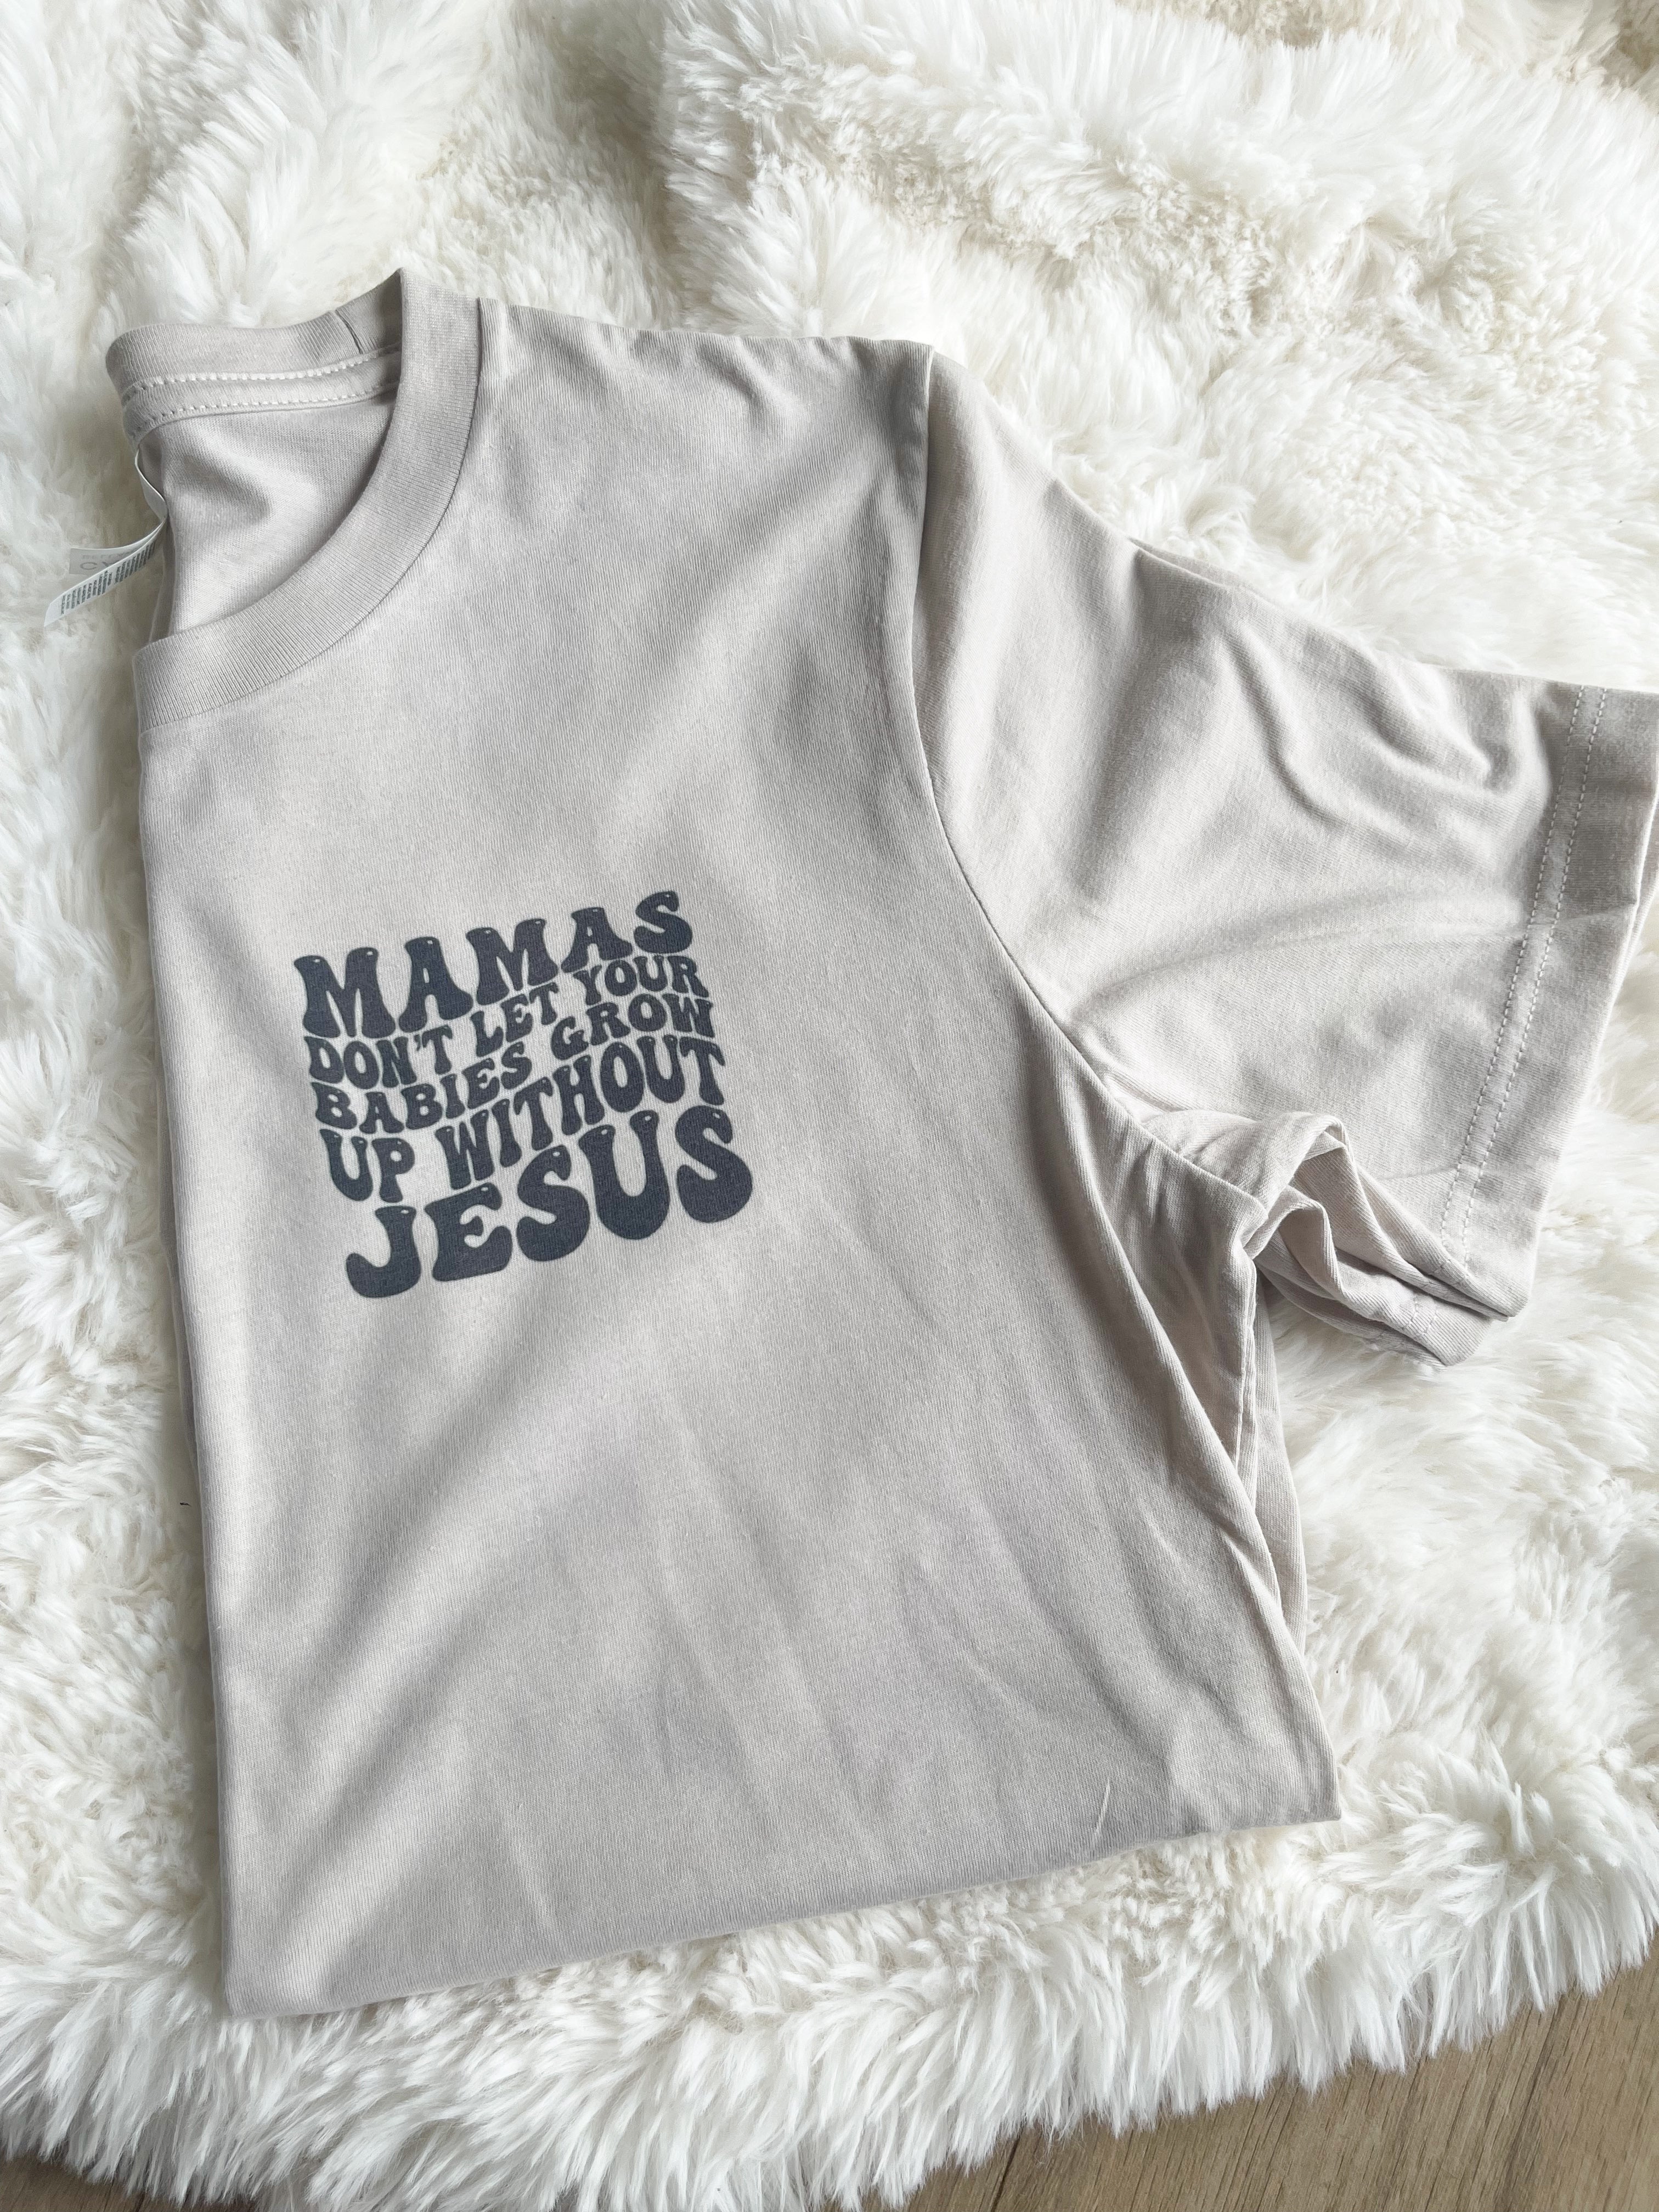 DON'T LET YOUR BABIES GROW UP WITHOUT JESUS